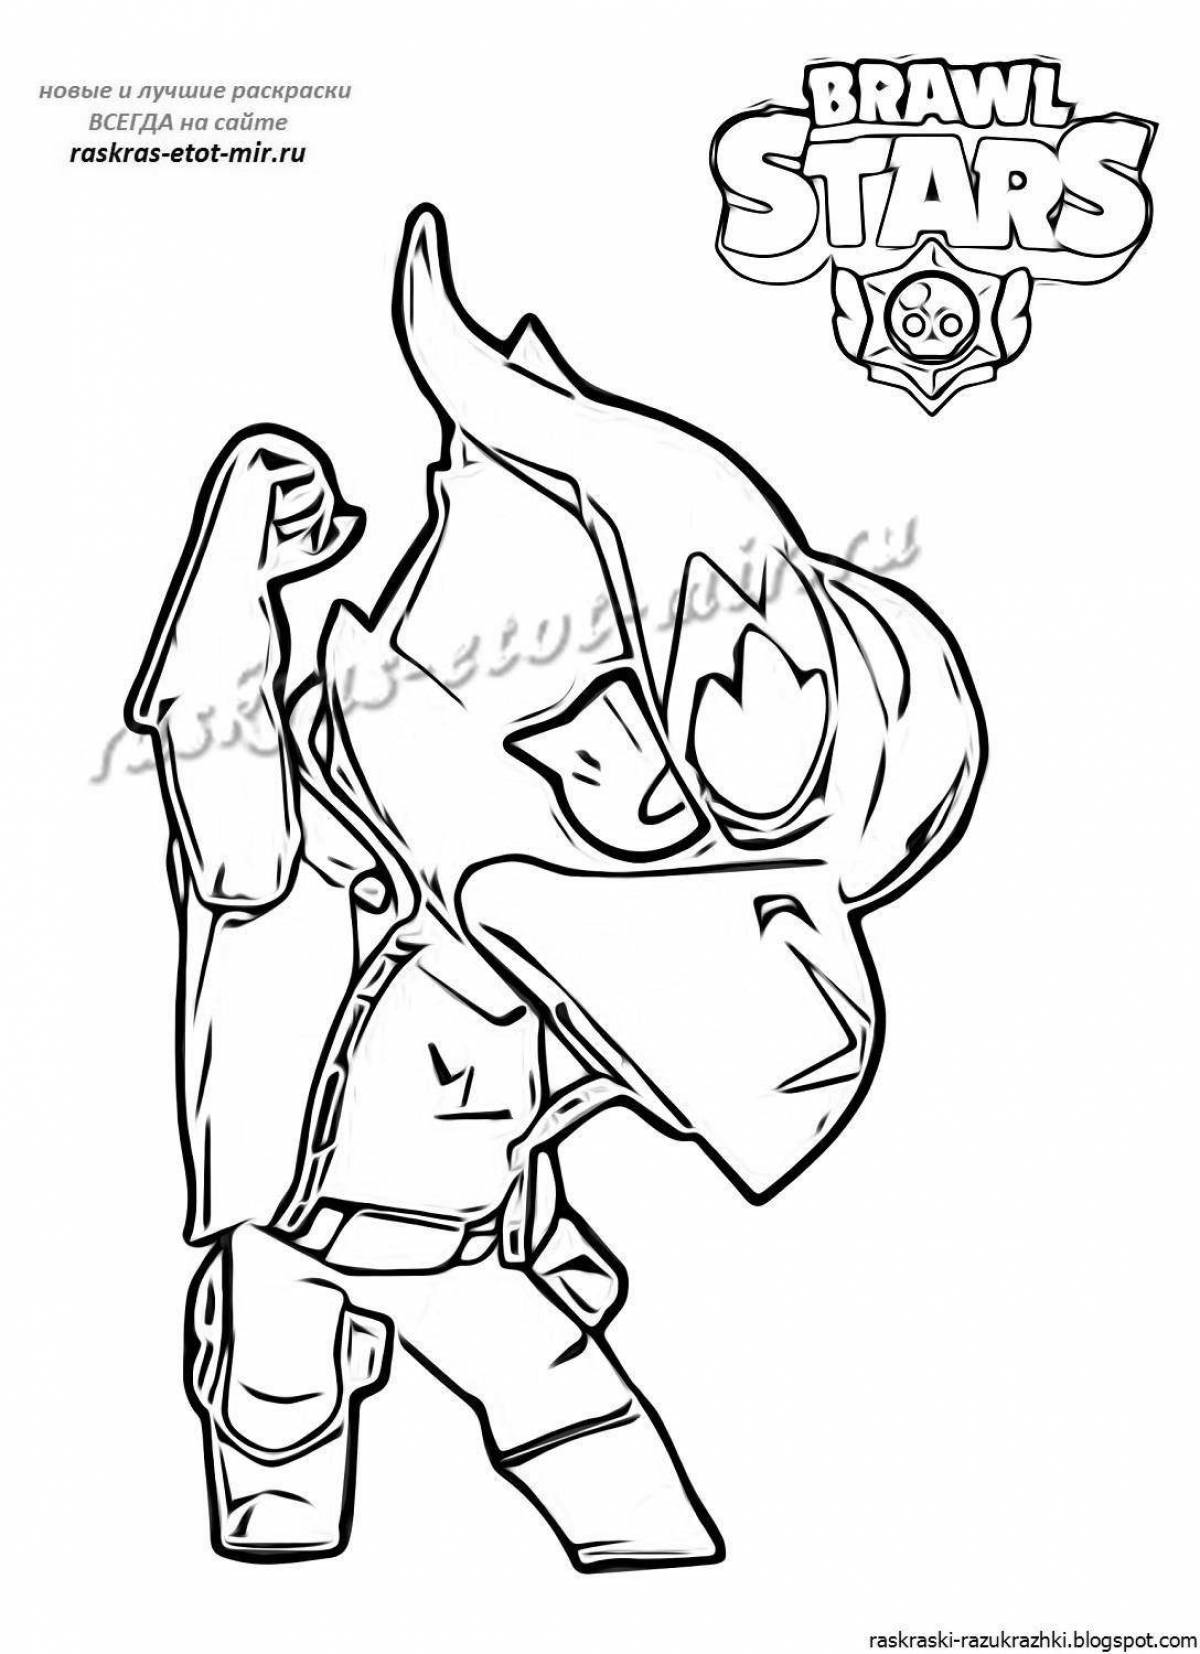 Coloring page charming mortis